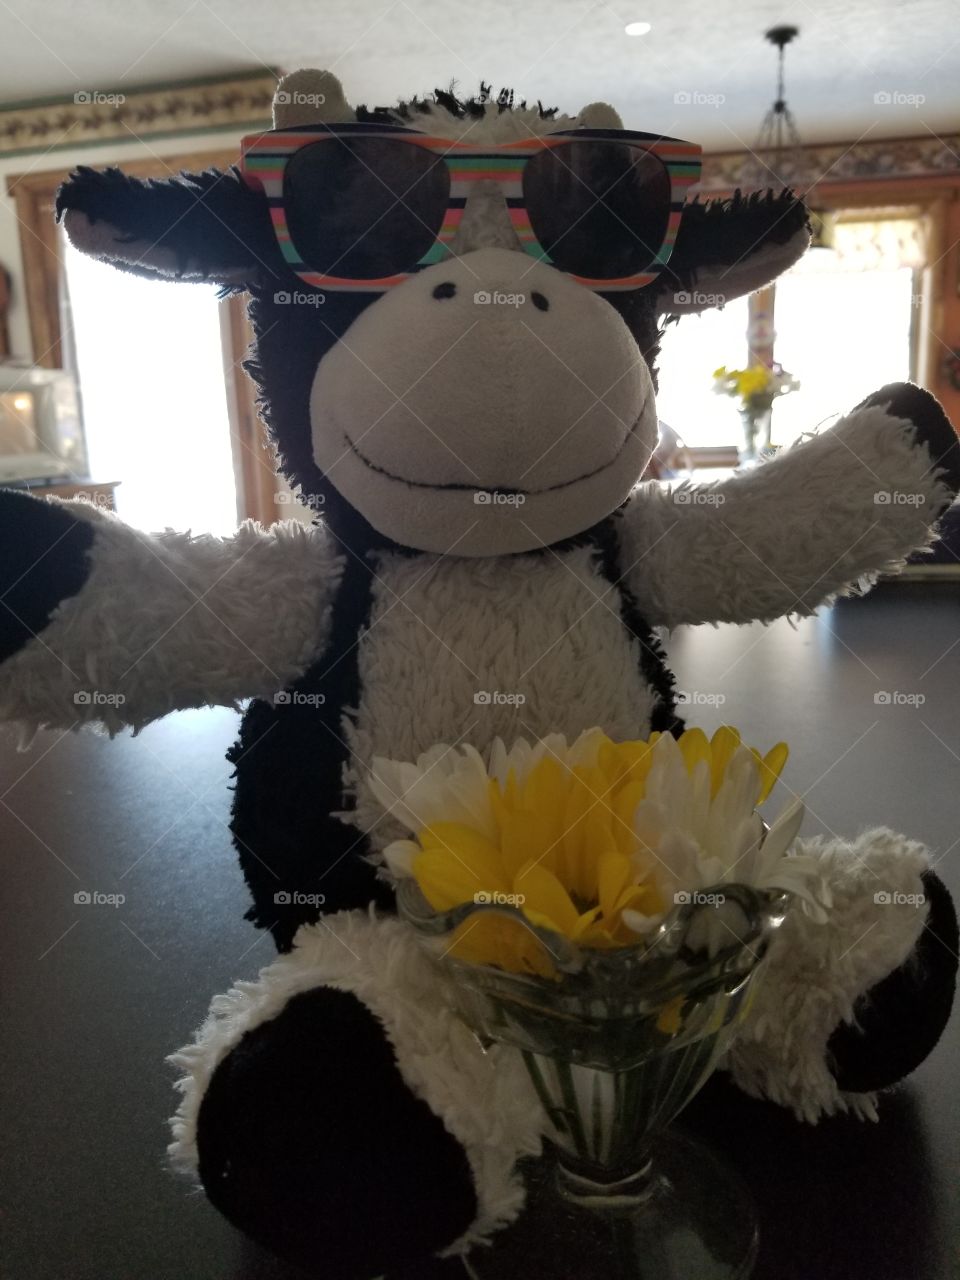 moo cow is rocking the shades and ready for summer, bring on the flowers and sunshine